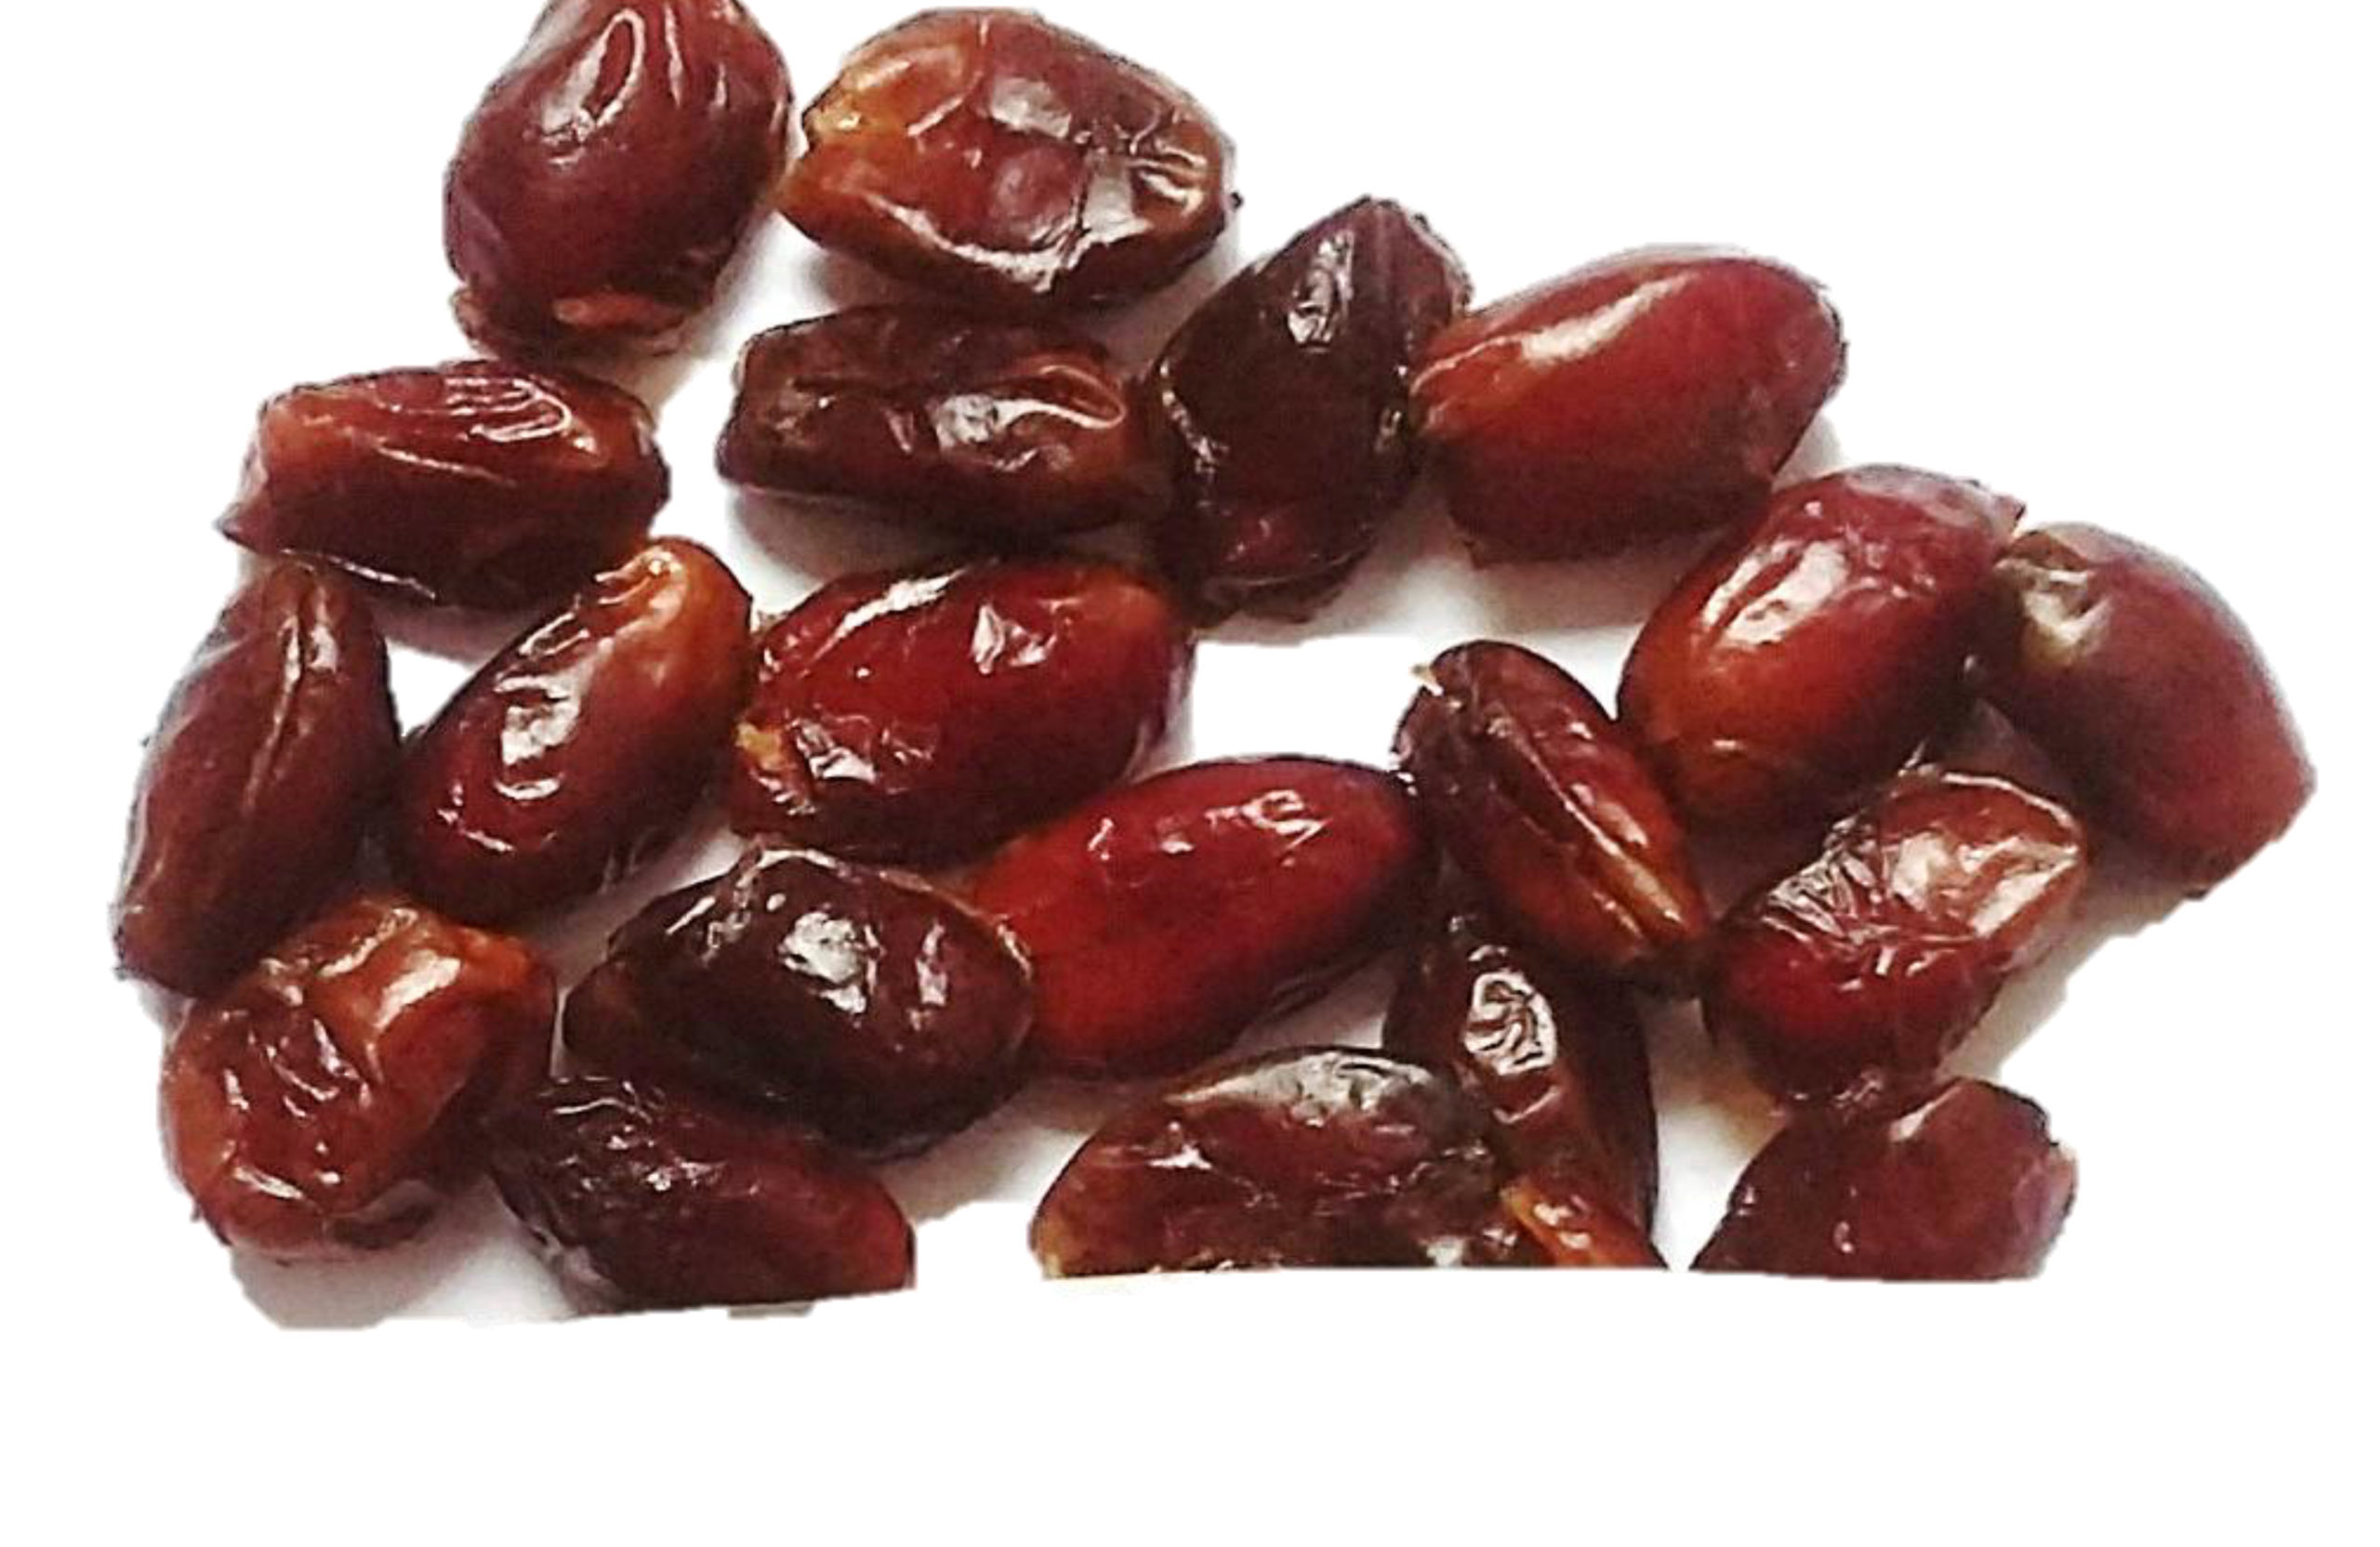 Aseel Pitted Dates FAQ